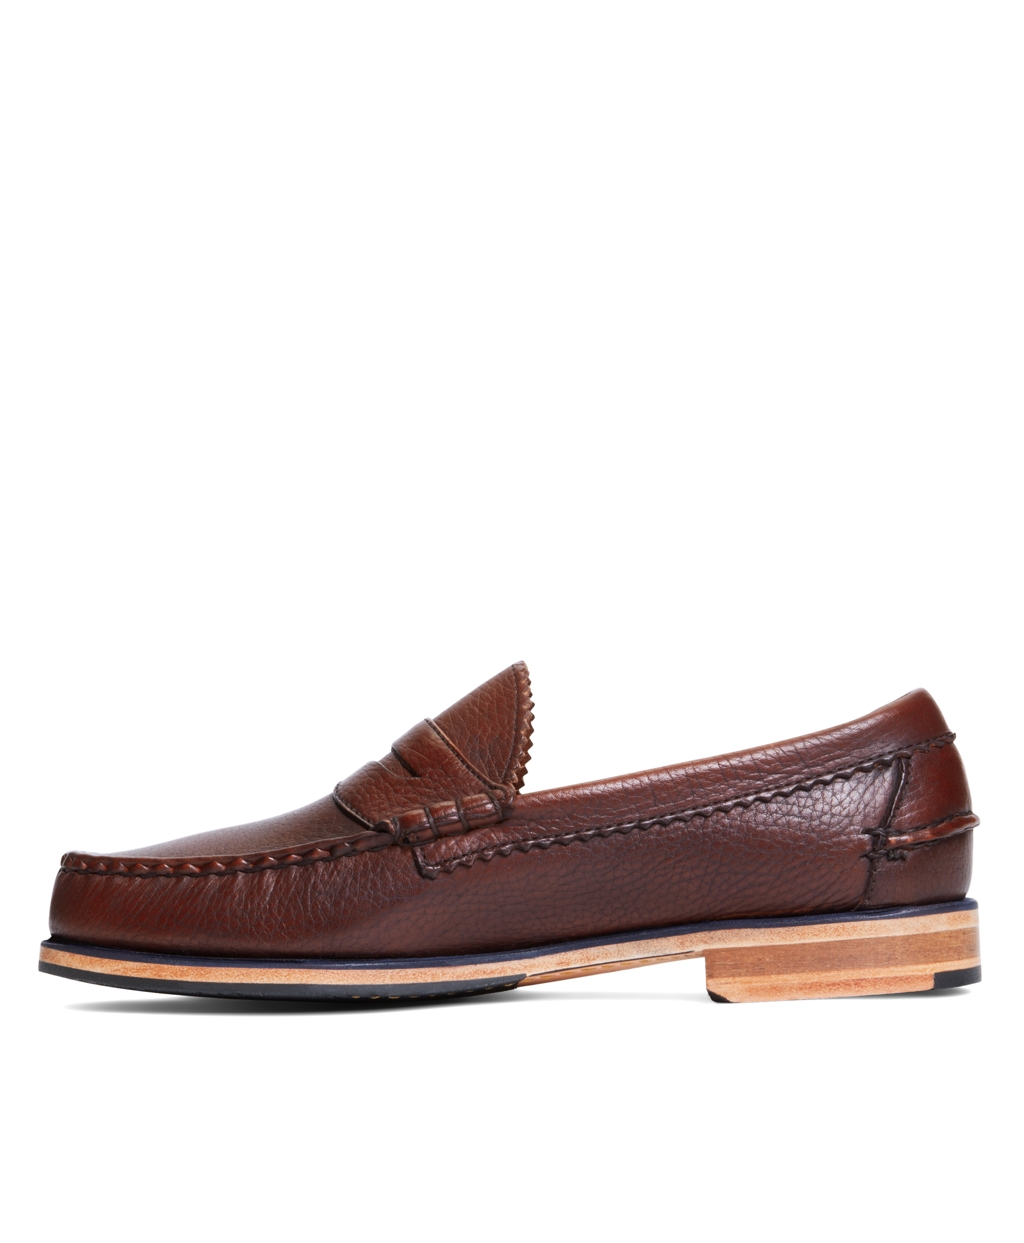 Brooks Brothers Leather Allen Edmonds Beef Roll Pebble Penny Loafers in ...